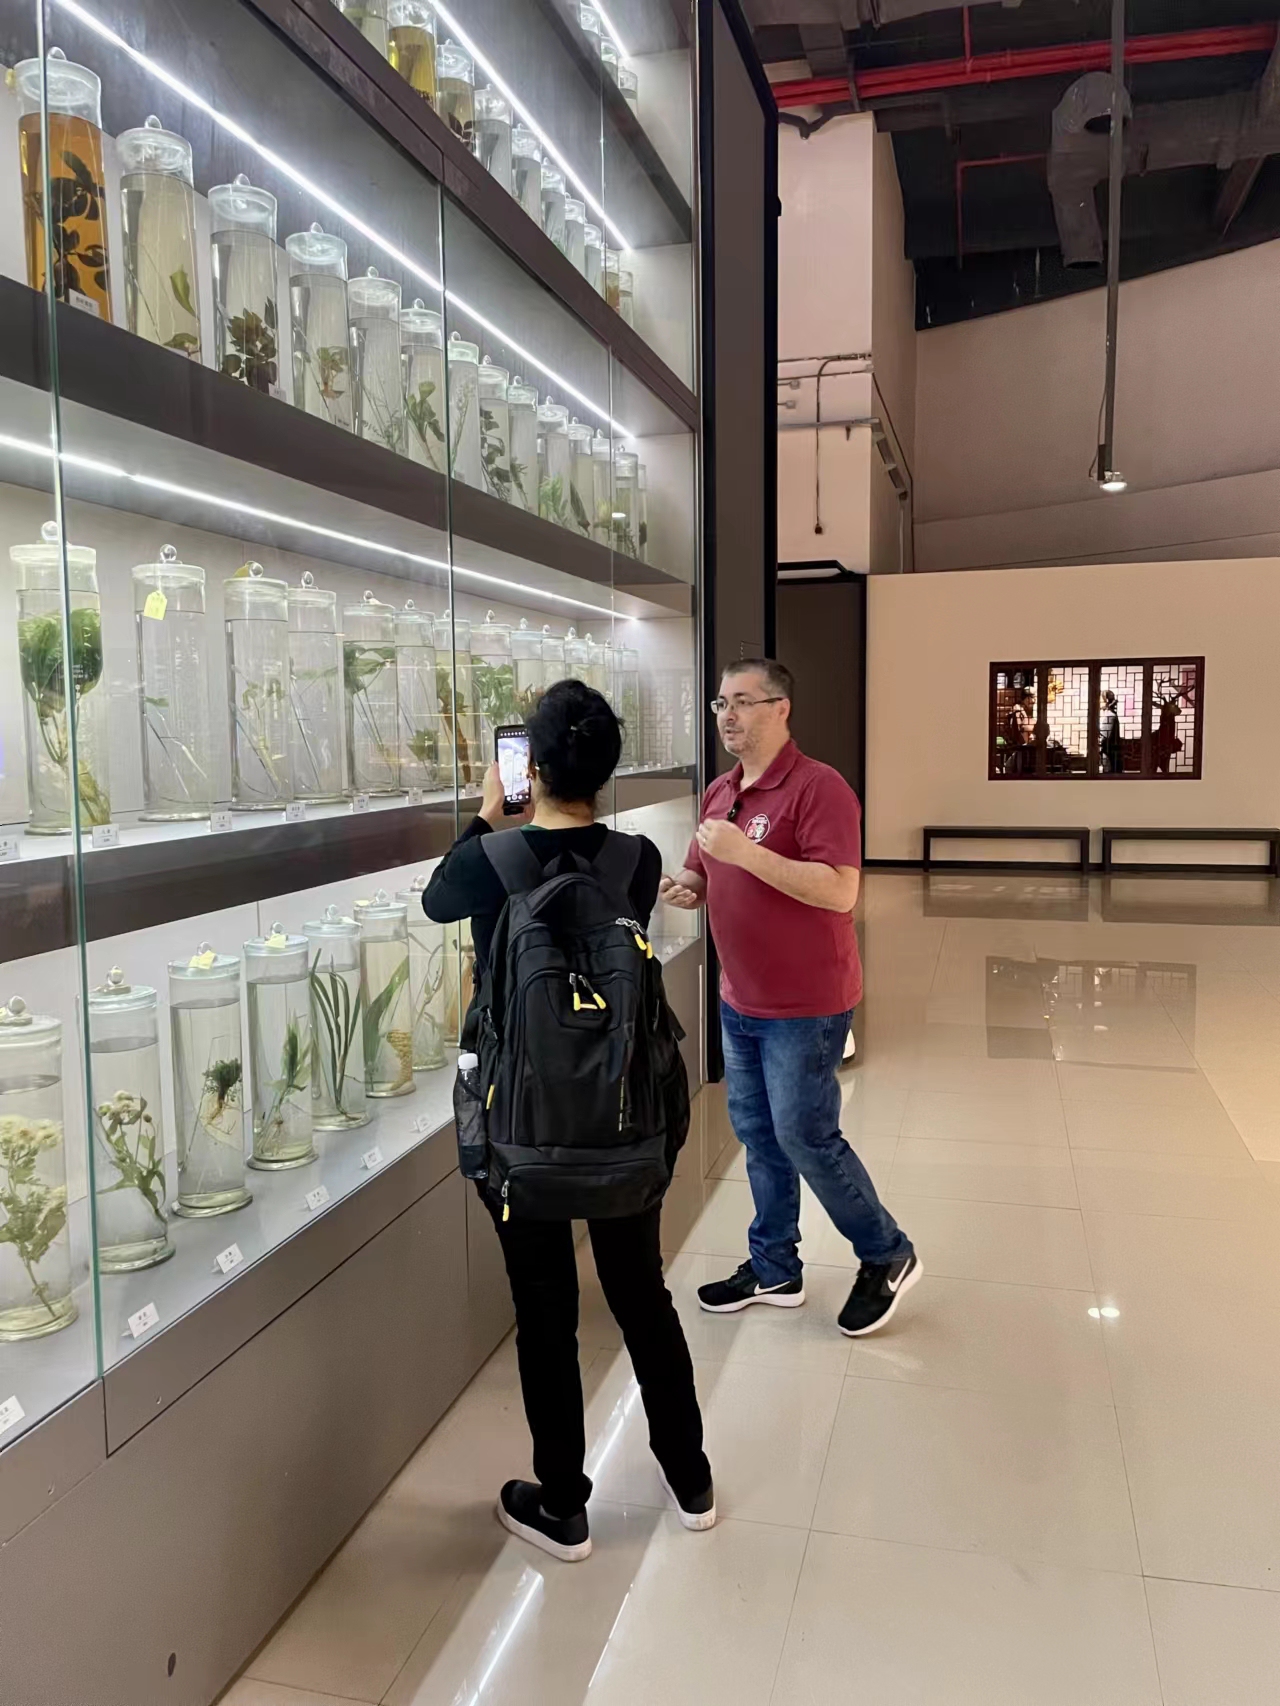 Reginaldo Filho (right), founder and director general of Faculdade EBRAMEC (which stands for Brazilian College of Chinese Medicine) visits the Shanghai University of Traditional Chinese Medicine (SHUTCM). Photo: Courtesy of SHUTCM